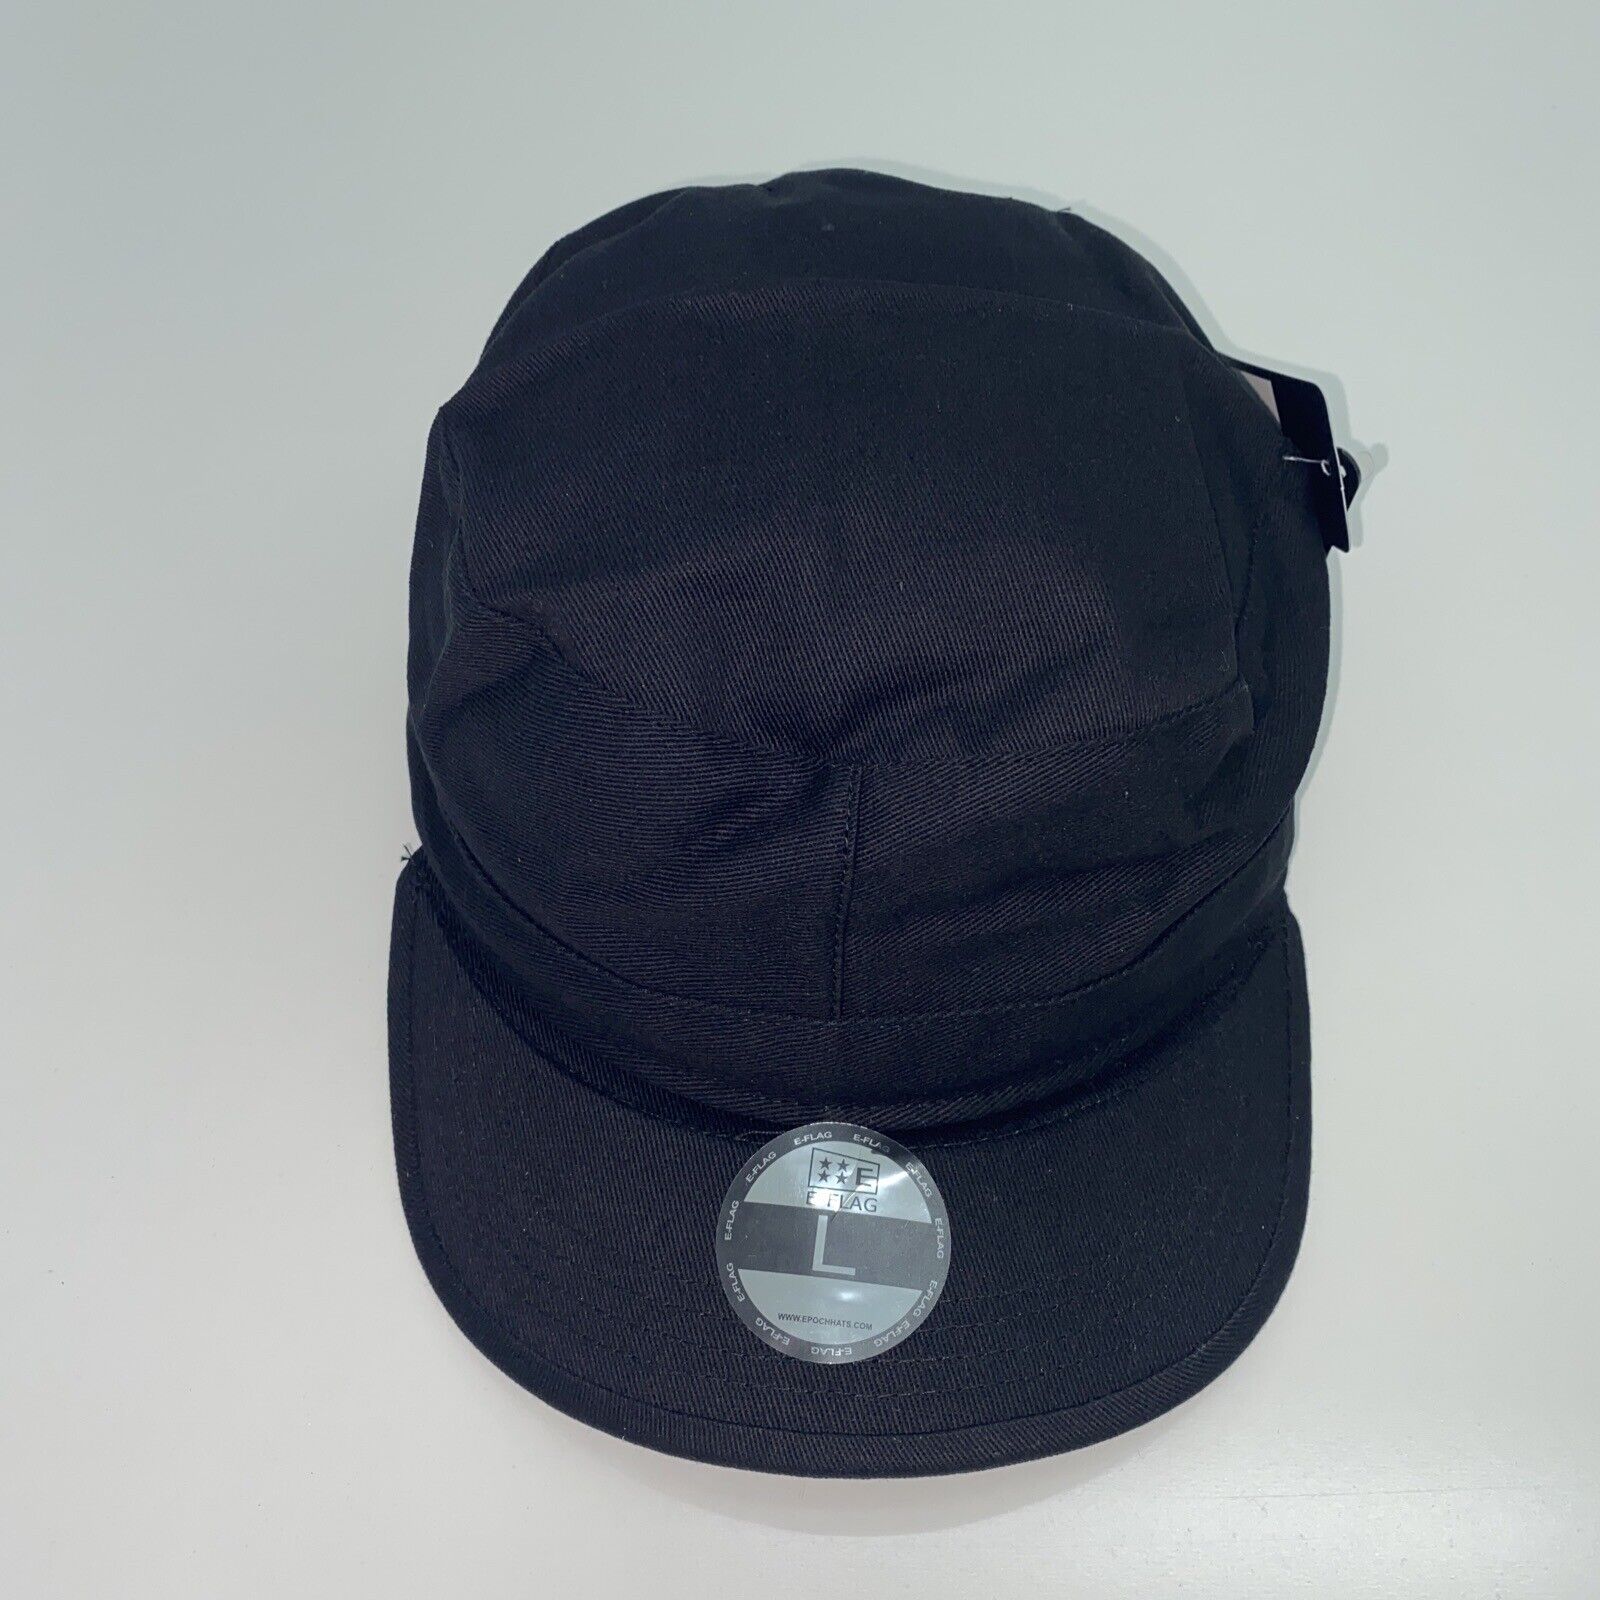 Epoch Hats Black Fitted Army Military Cadet Size - beyond exchange